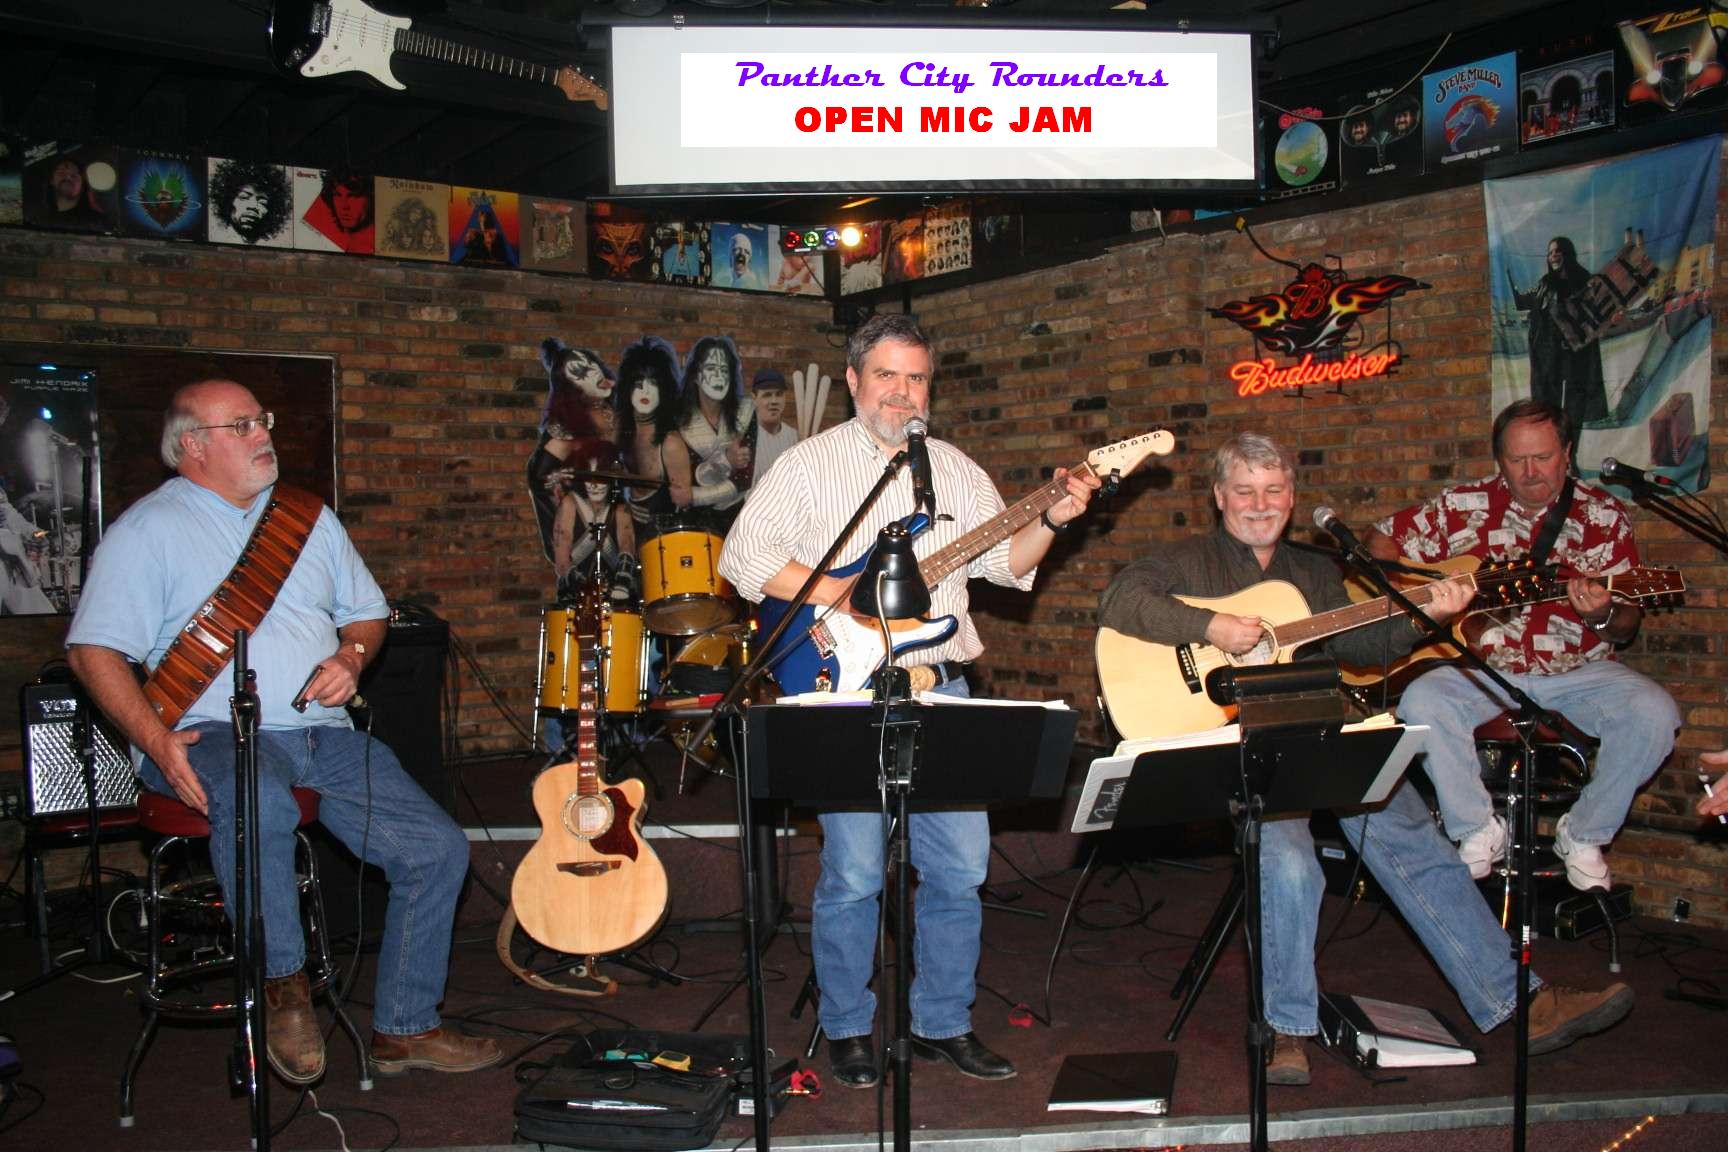 Panther City Rounders Open Mic Jam at the Rockstar Sportsbar